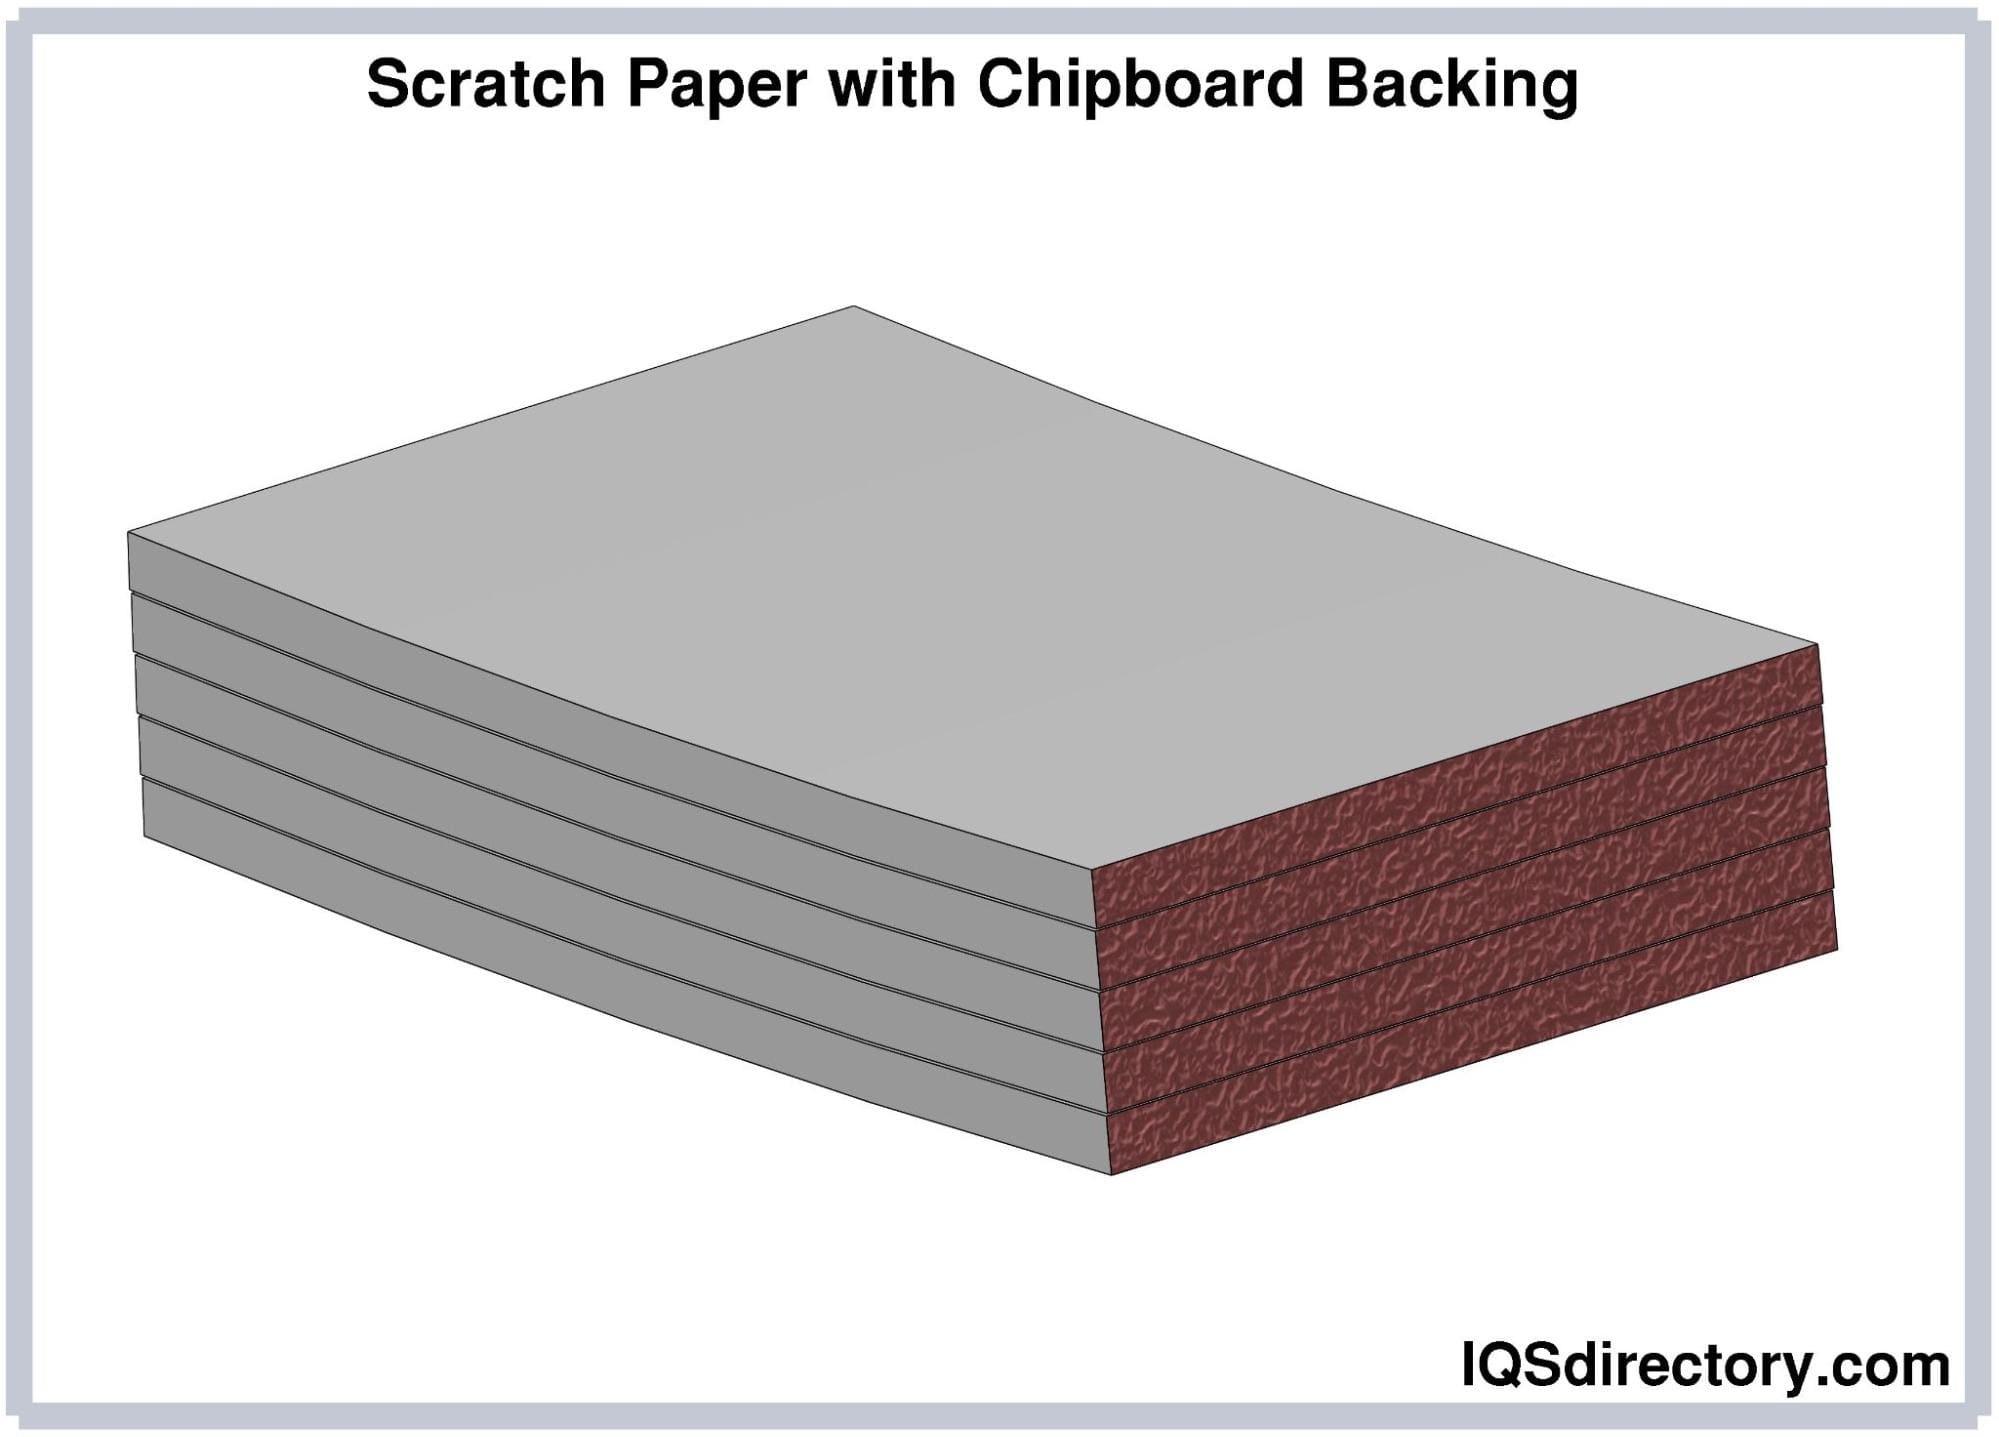 Scratch Paper with Chipboard Backing